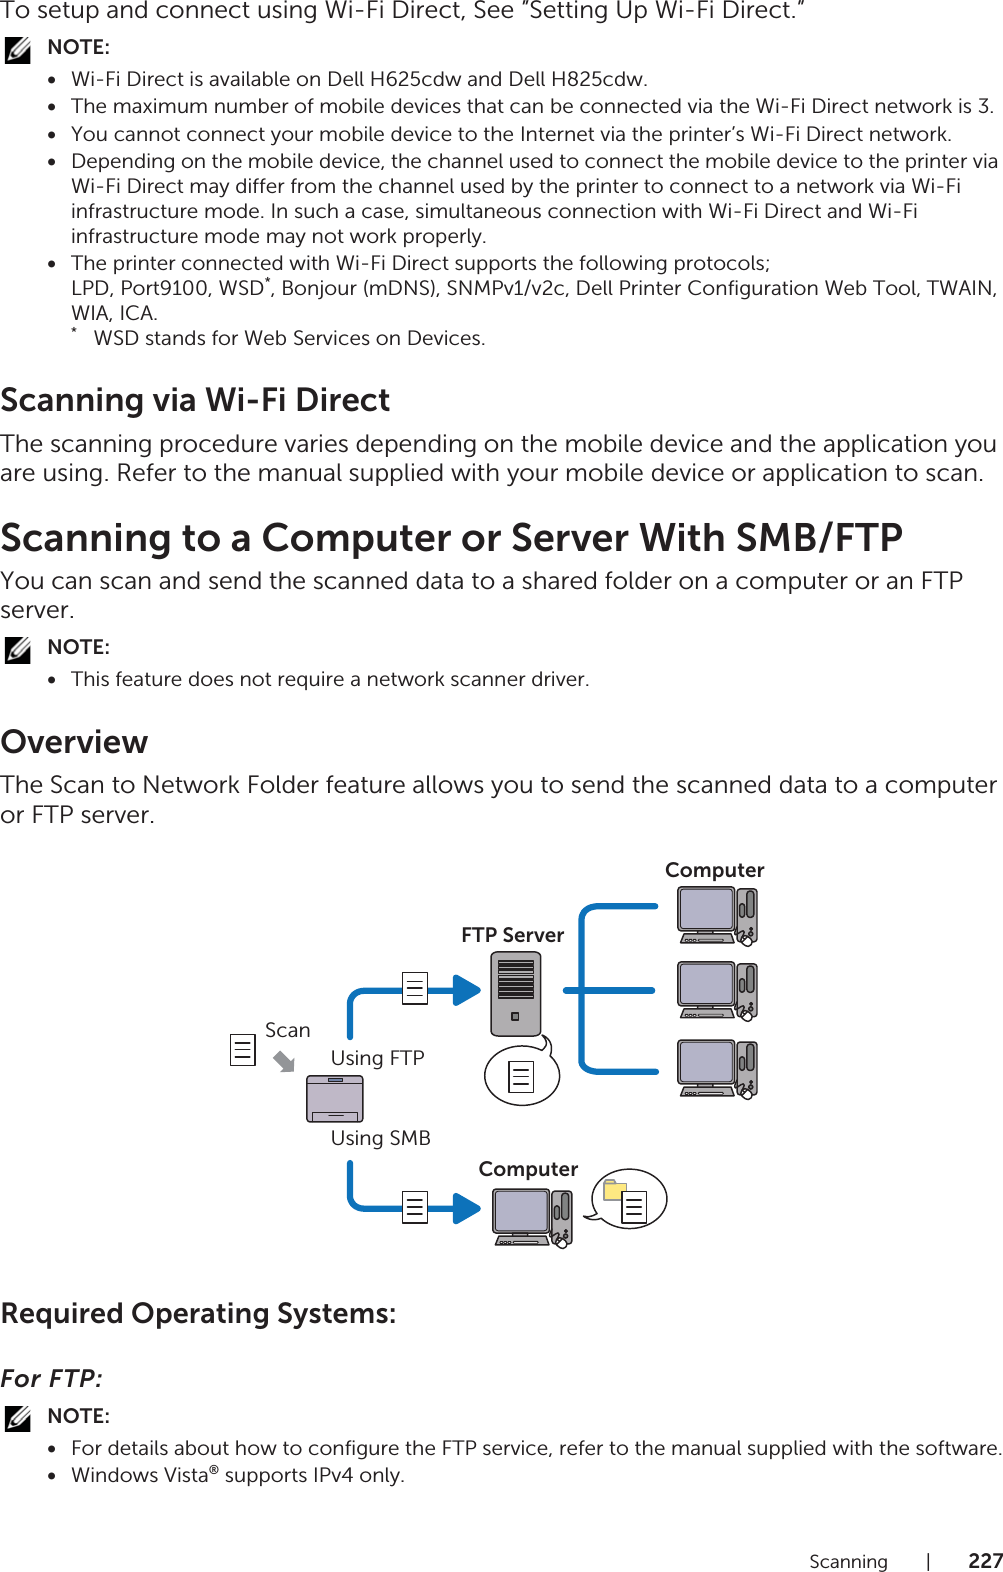 Scanning |227To setup and connect using Wi-Fi Direct, See ”Setting Up Wi-Fi Direct.”NOTE:•Wi-Fi Direct is available on Dell H625cdw and Dell H825cdw.•The maximum number of mobile devices that can be connected via the Wi-Fi Direct network is 3.•You cannot connect your mobile device to the Internet via the printer’s Wi-Fi Direct network.•Depending on the mobile device, the channel used to connect the mobile device to the printer via Wi-Fi Direct may differ from the channel used by the printer to connect to a network via Wi-Fi infrastructure mode. In such a case, simultaneous connection with Wi-Fi Direct and Wi-Fi infrastructure mode may not work properly.•The printer connected with Wi-Fi Direct supports the following protocols;LPD, Port9100, WSD*, Bonjour (mDNS), SNMPv1/v2c, Dell Printer Configuration Web Tool, TWAIN, WIA, ICA.*   WSD stands for Web Services on Devices.Scanning via Wi-Fi DirectThe scanning procedure varies depending on the mobile device and the application you are using. Refer to the manual supplied with your mobile device or application to scan.Scanning to a Computer or Server With SMB/FTPYou can scan and send the scanned data to a shared folder on a computer or an FTP server.NOTE:•This feature does not require a network scanner driver.OverviewThe Scan to Network Folder feature allows you to send the scanned data to a computer or FTP server.Required Operating Systems:For FTP:NOTE:•For details about how to configure the FTP service, refer to the manual supplied with the software.•Windows Vista® supports IPv4 only.ScanUsing FTPUsing SMBFTP ServerComputerComputer